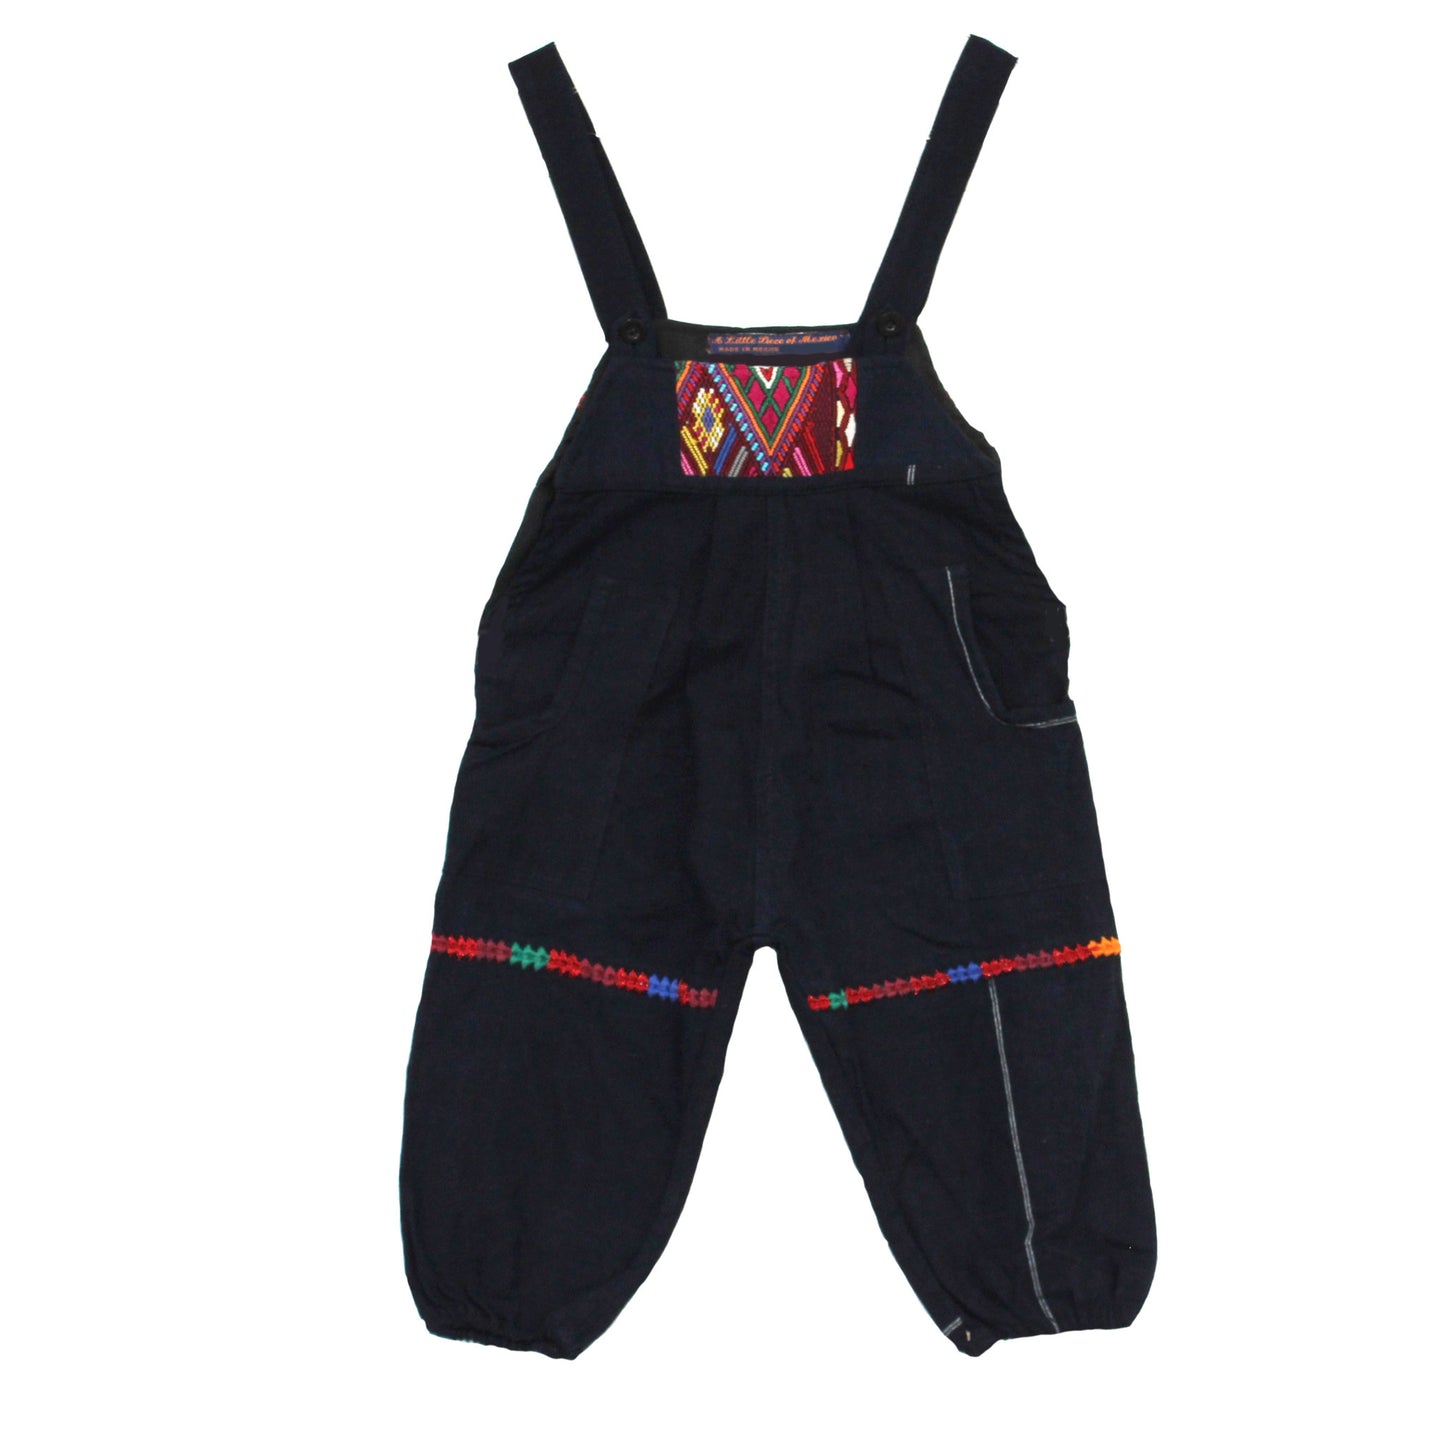 Boys overalls cotton with back-strap loom weaving